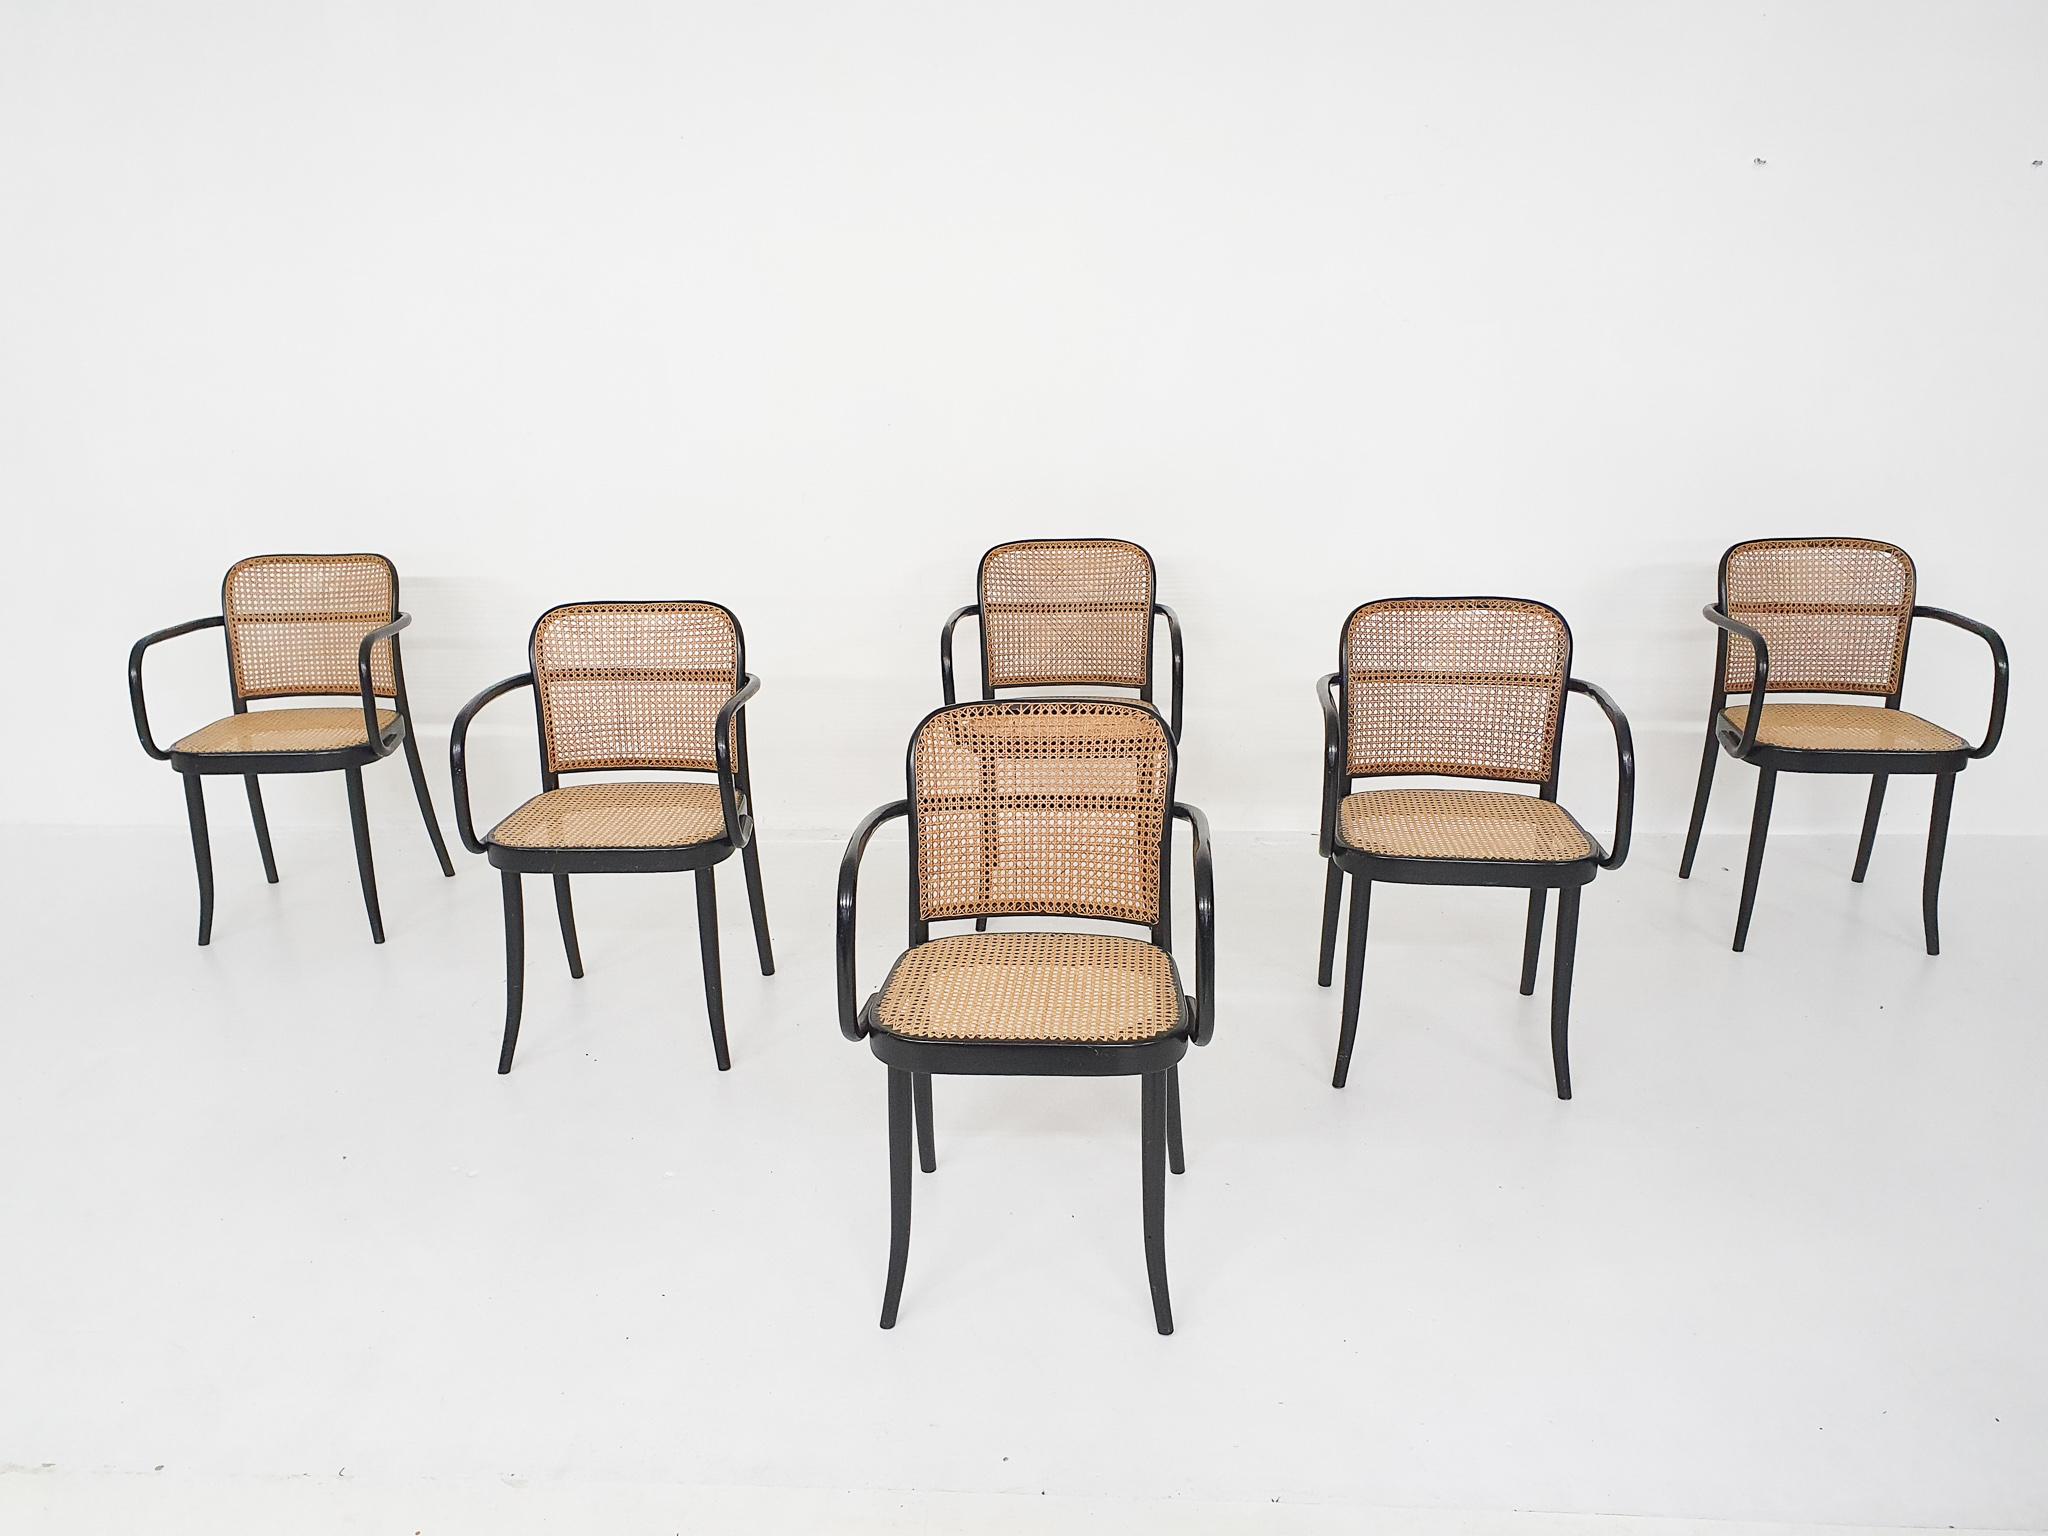 Black Thonet chairs with webbing seating and back.
Some chairs have small damages in the webbing.
Marked at the bottom.